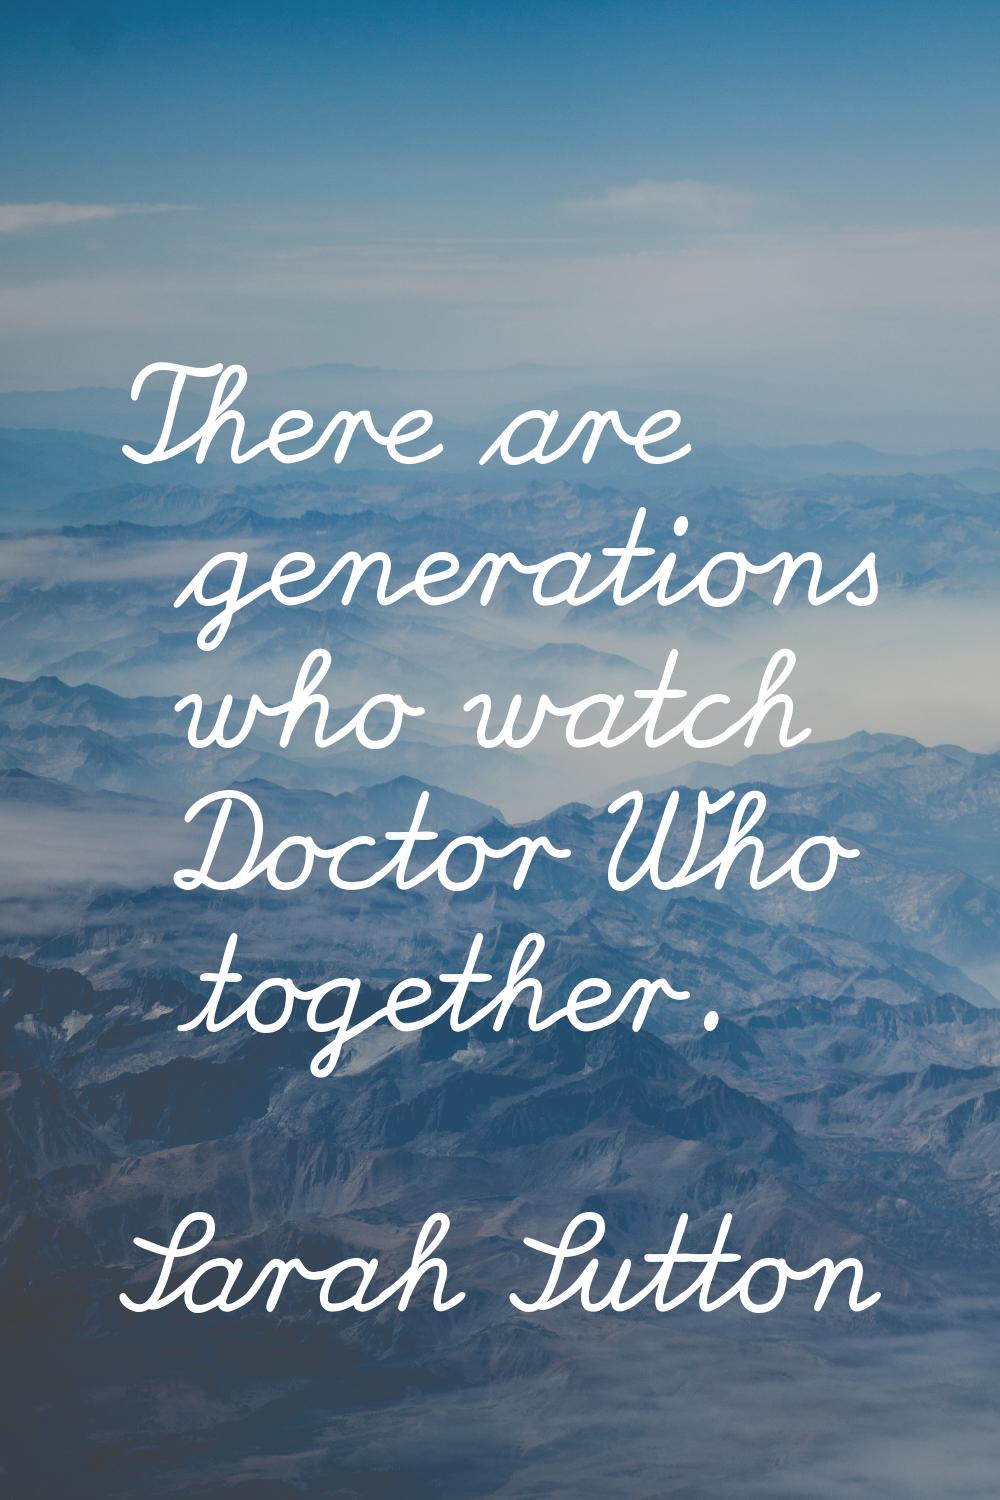 There are generations who watch Doctor Who together.